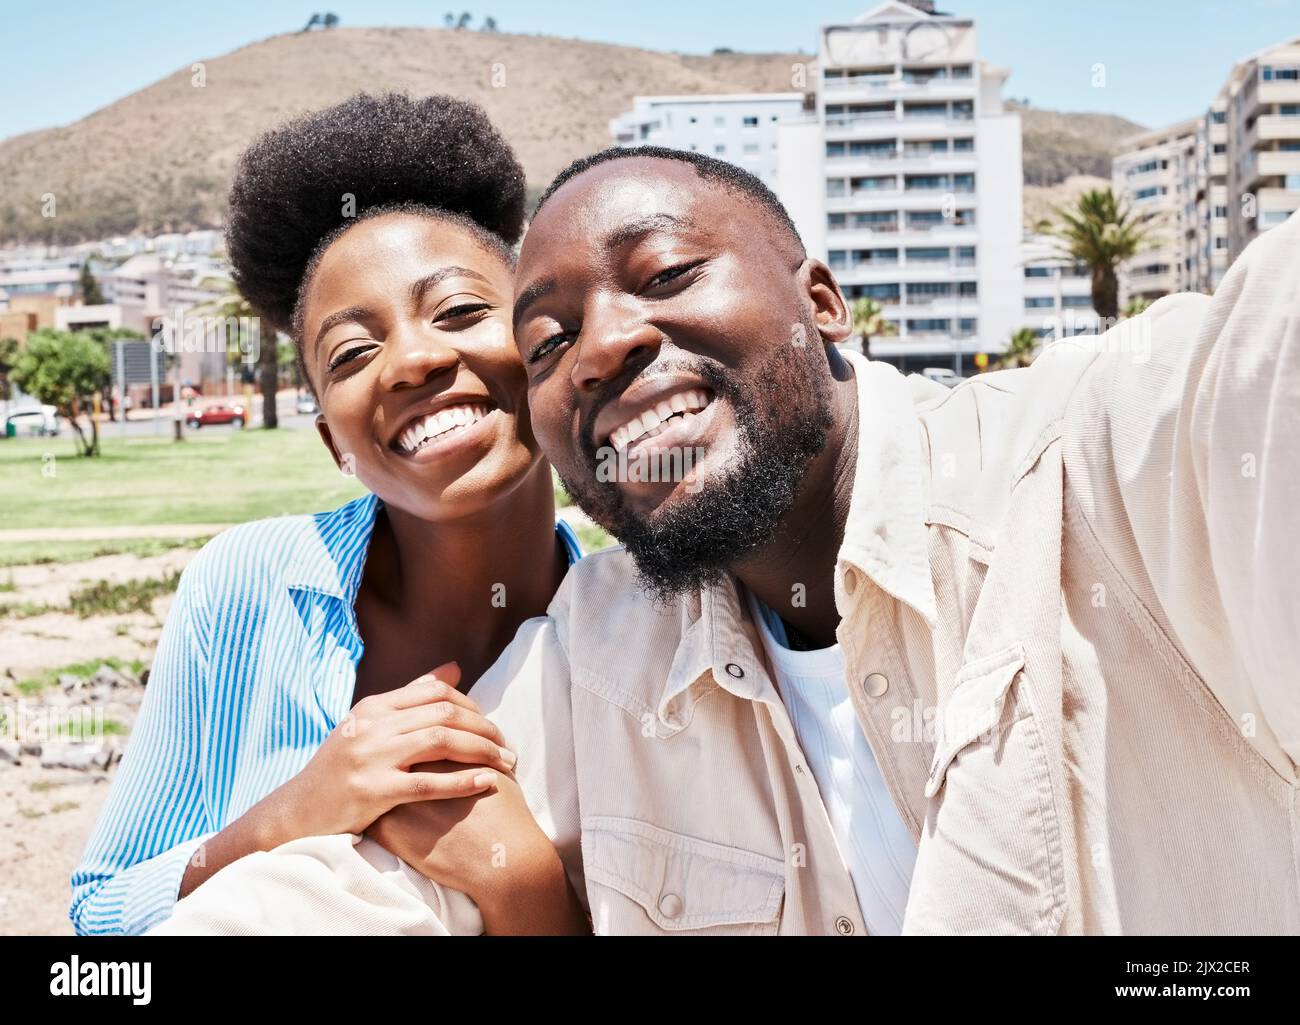 Portrait, love selfie and happy black couple together in the city, street or outdoors. Romance, man and woman taking a romantic picture with happiness Stock Photo